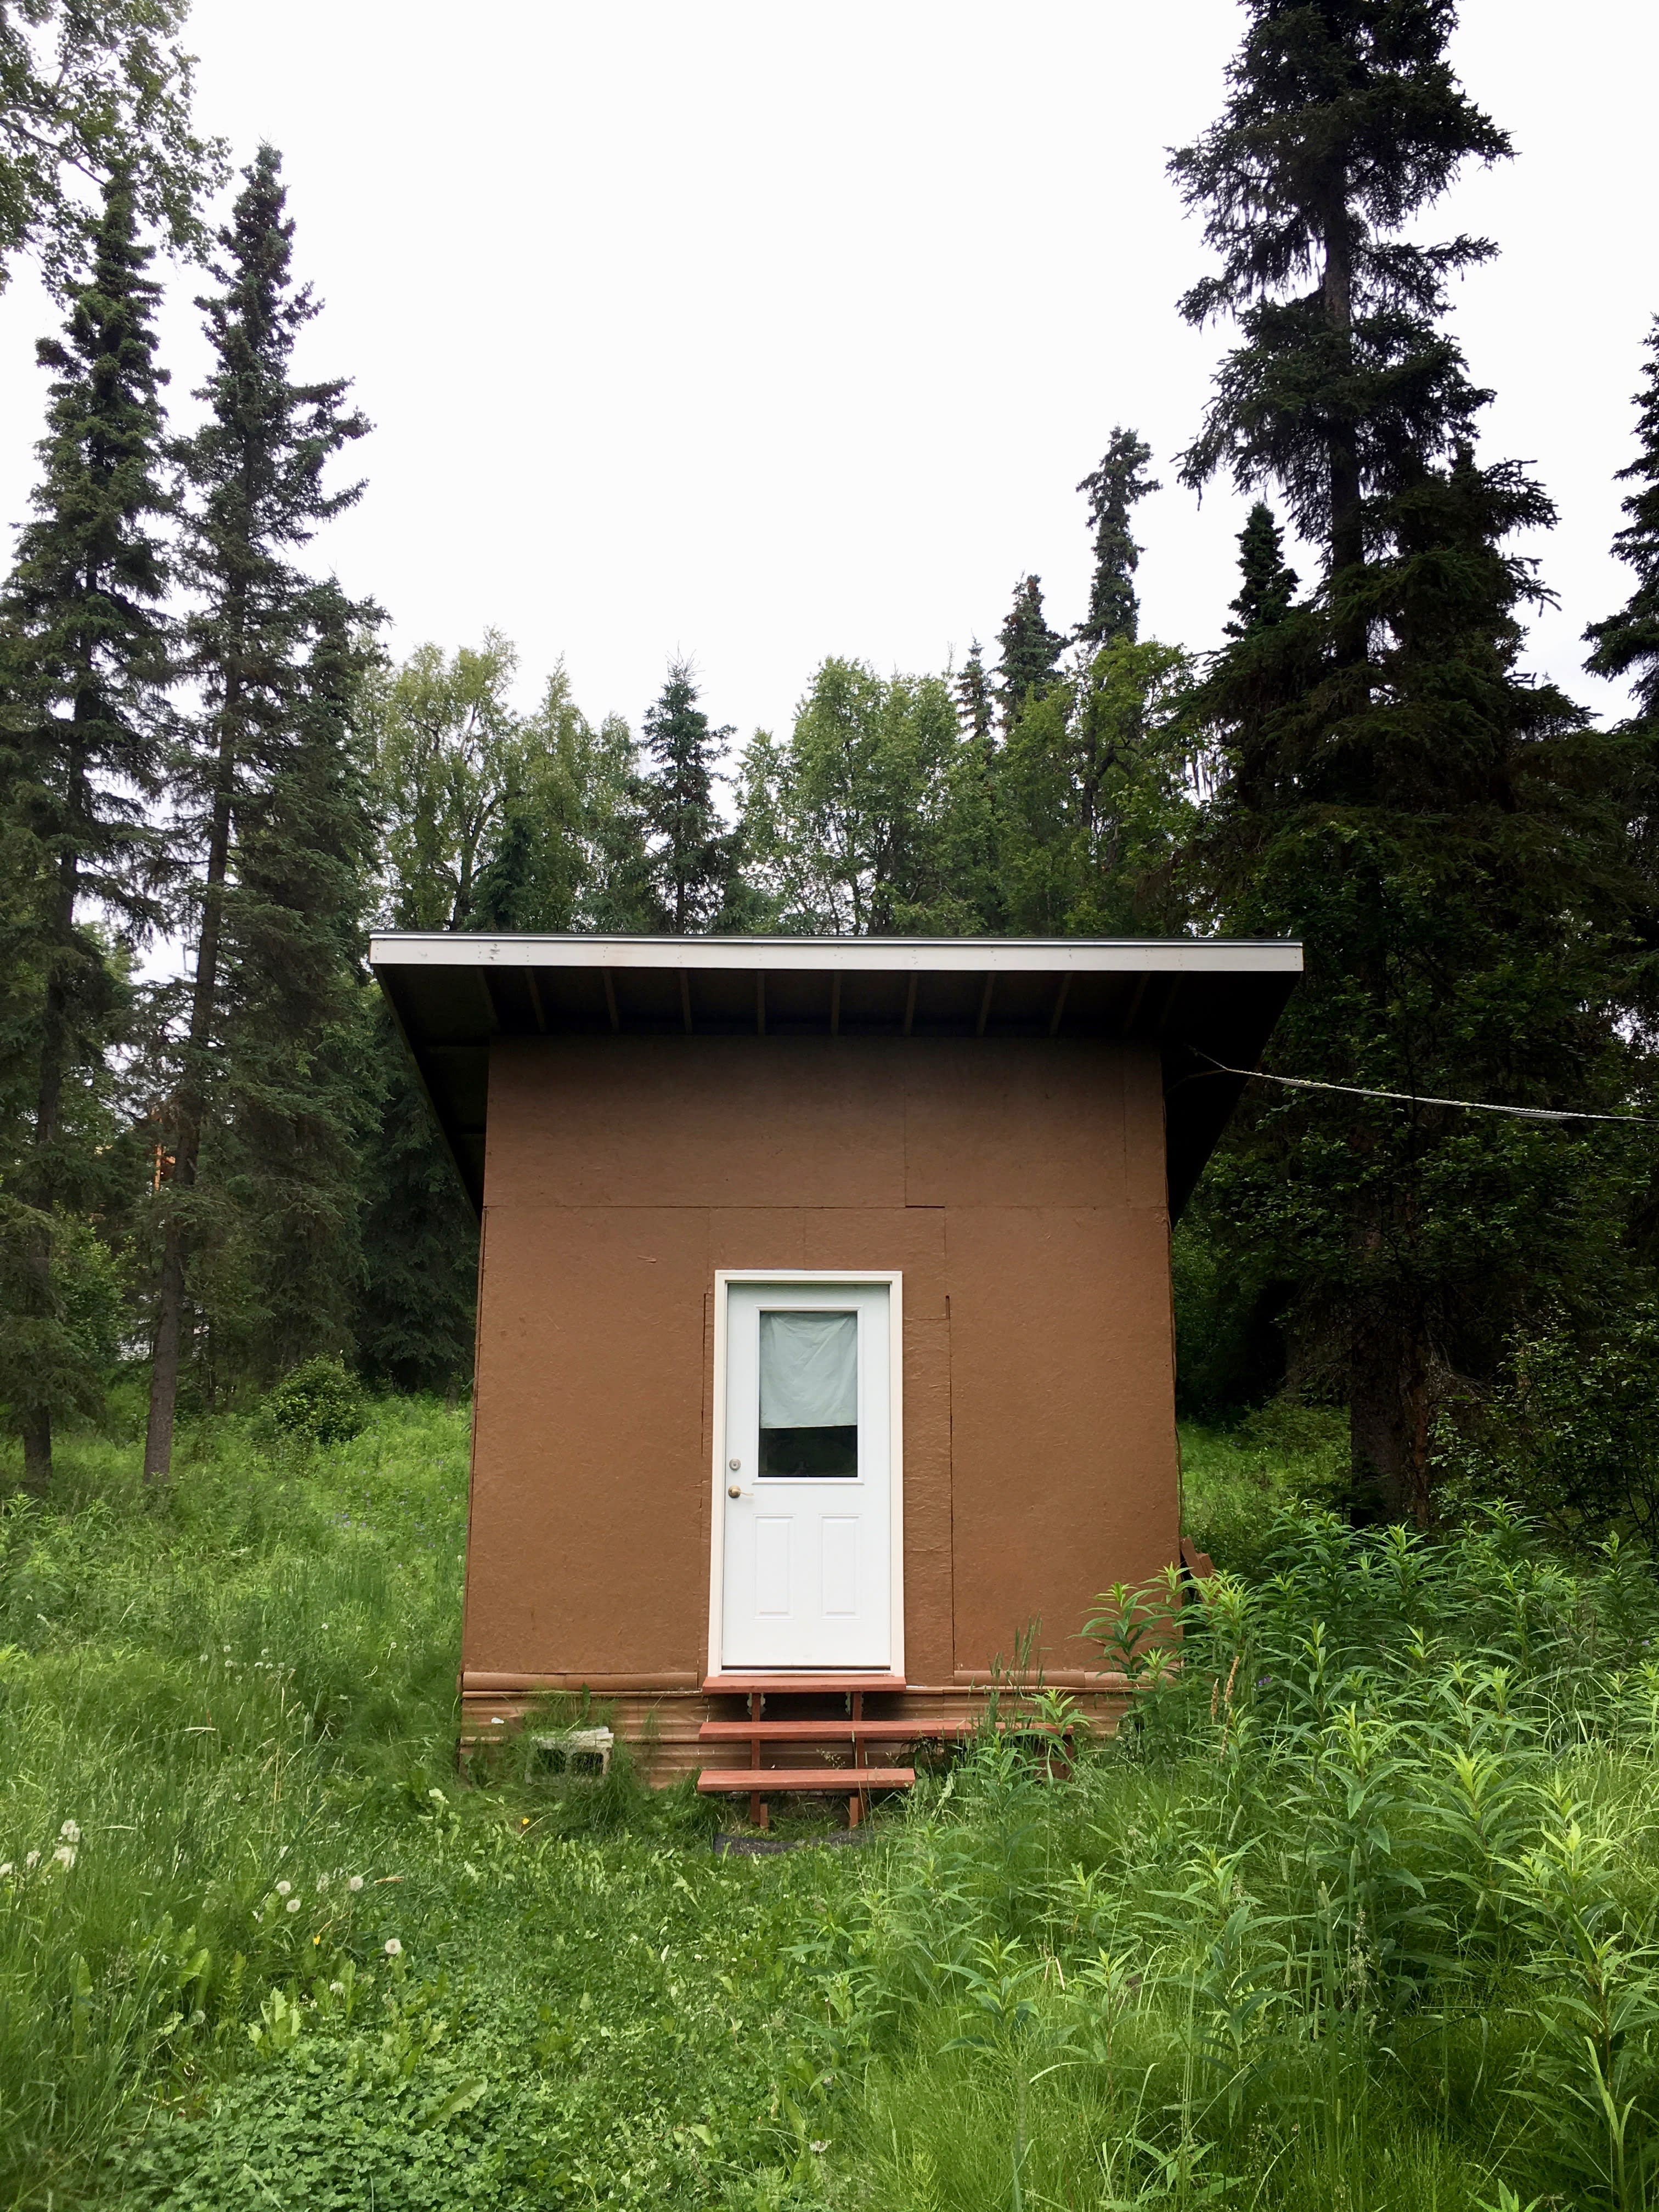 The cabin is surrounded by towering spruce trees on 3 sides